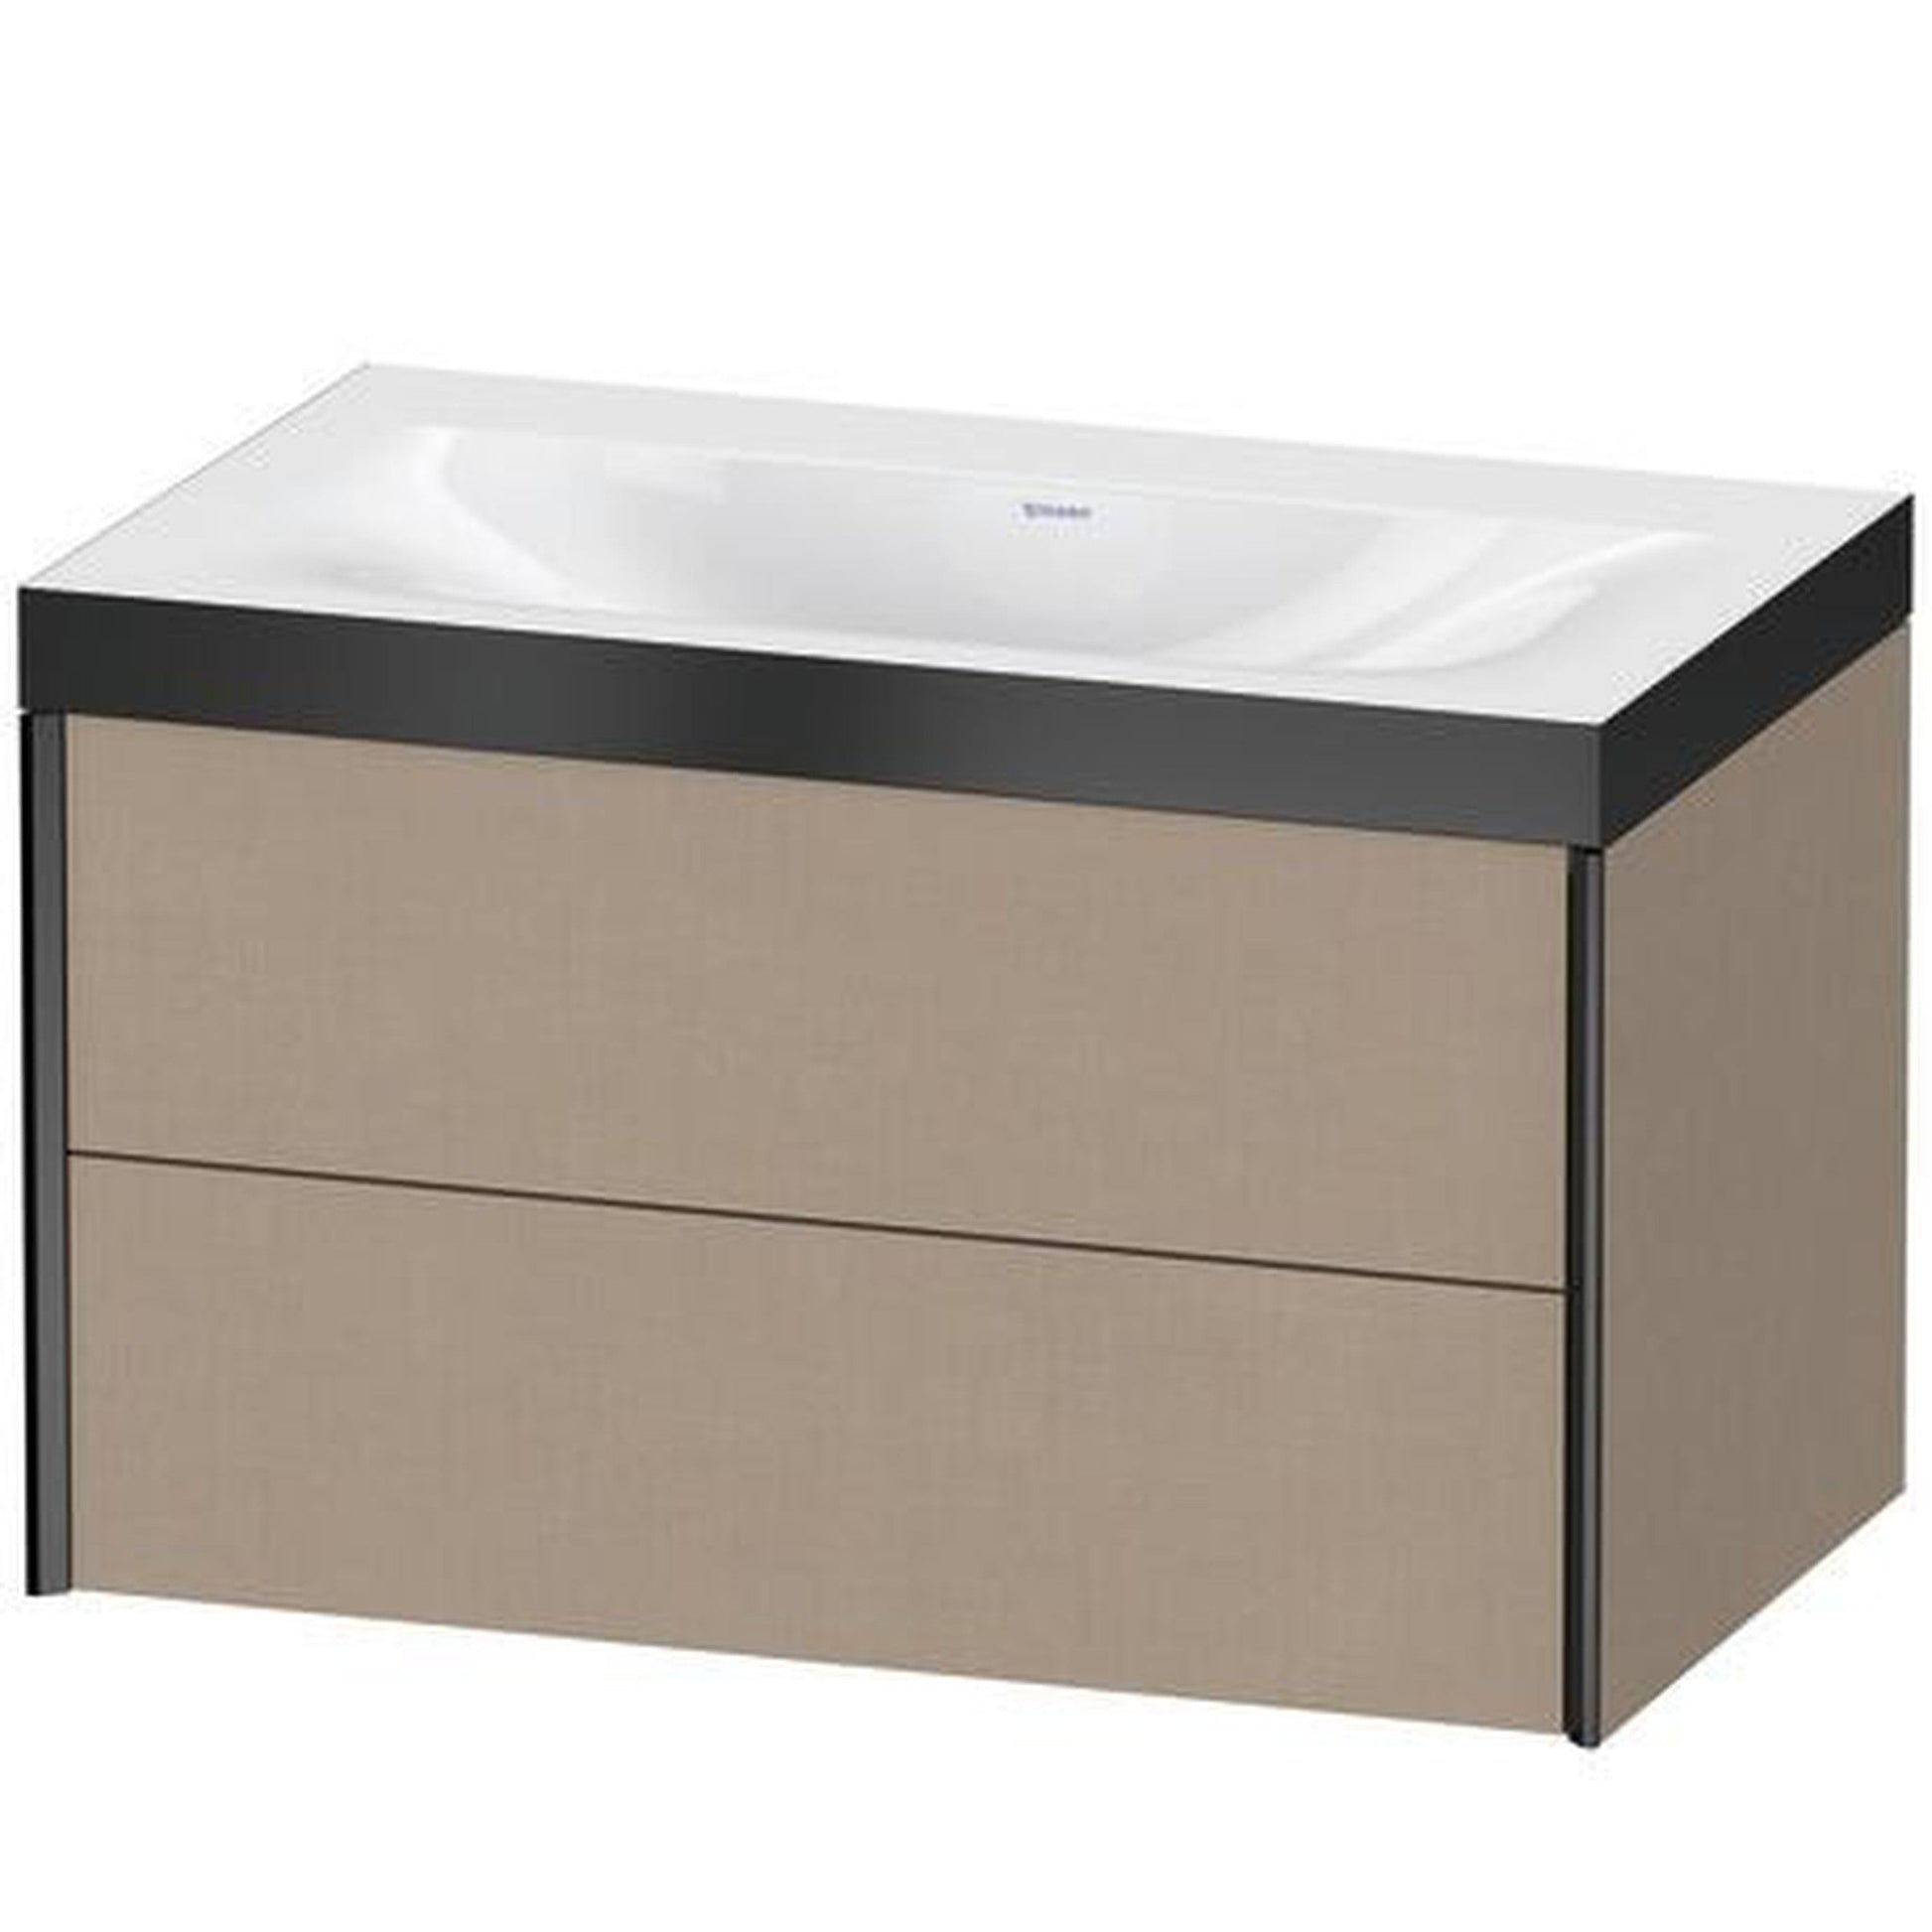 Duravit Xviu 31" x 20" x 19" Two Drawer C-Bonded Wall-Mount Vanity Kit Without Tap Hole, Linen (XV4615NB275P)